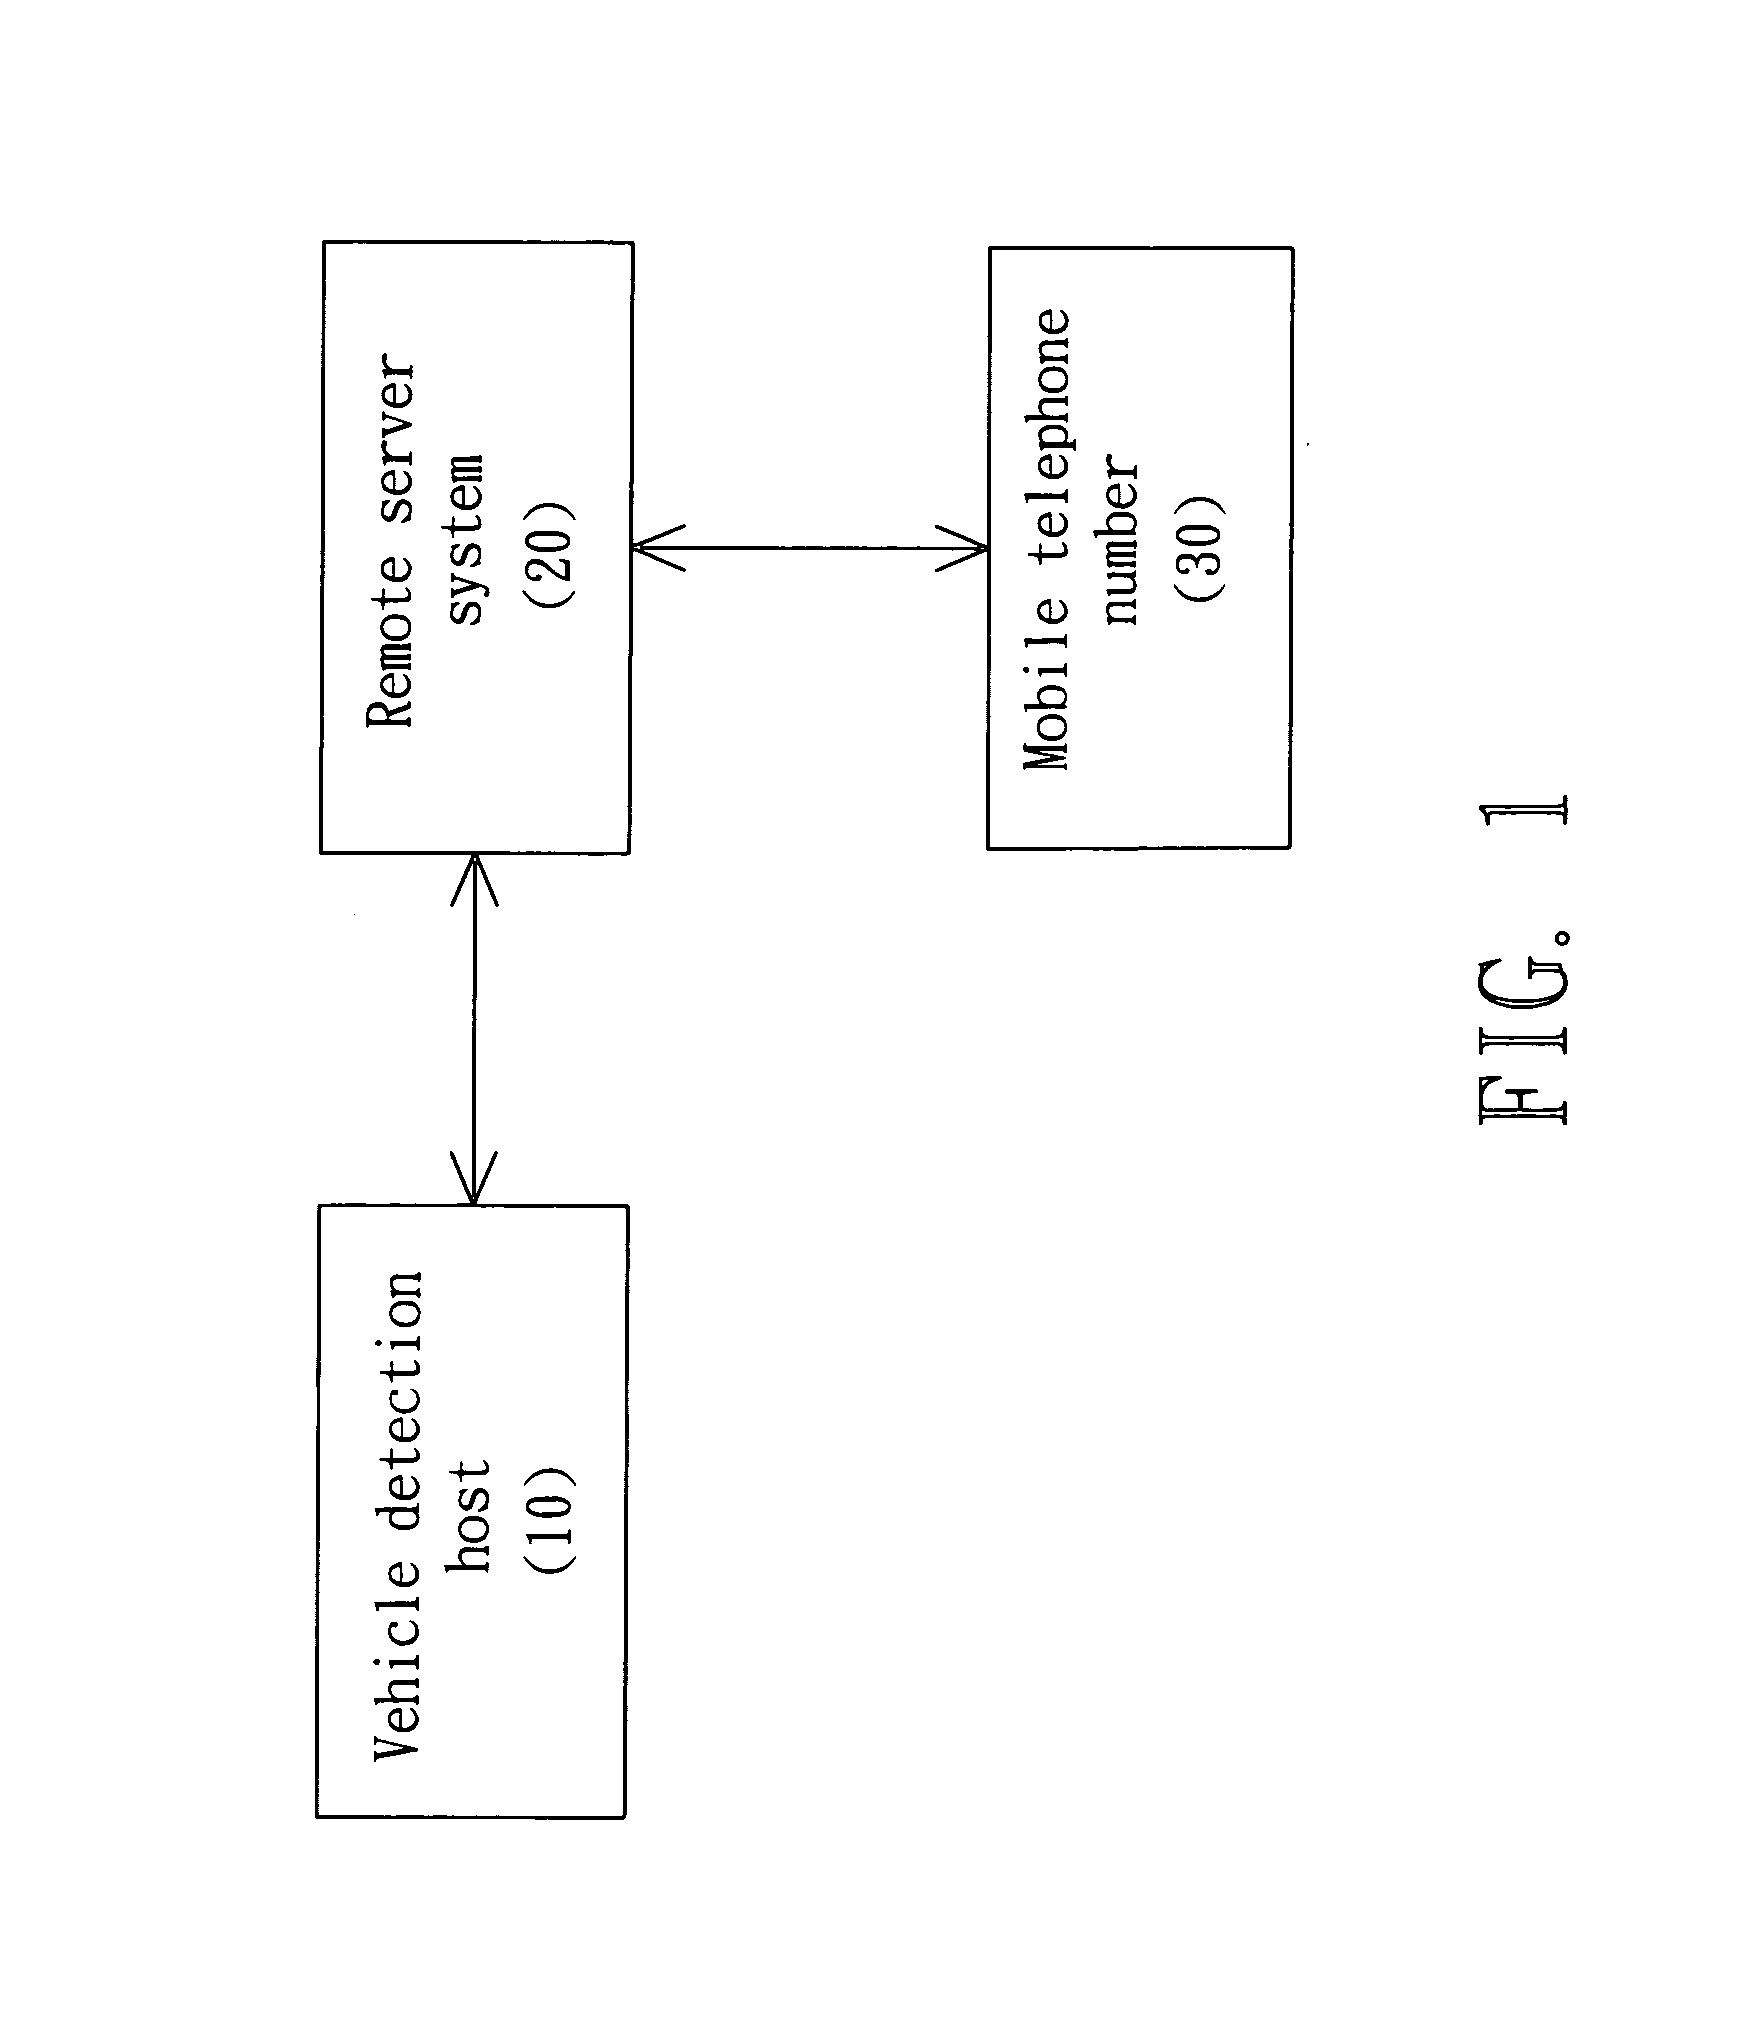 Traffic flow and vehicle position detection system